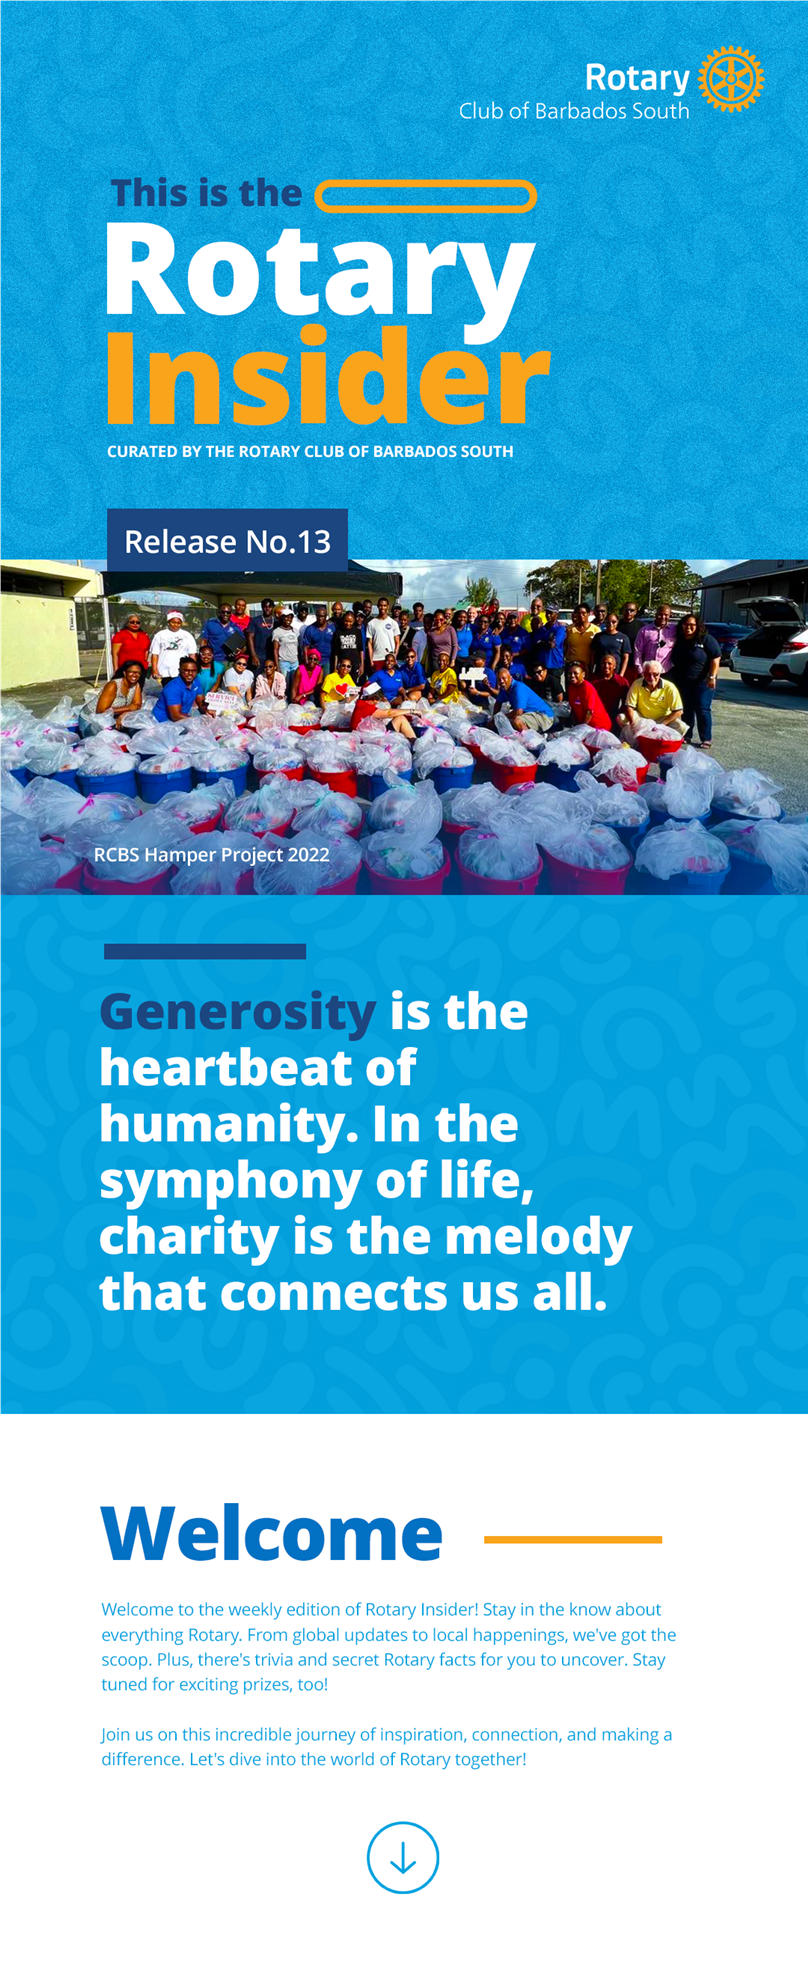 This is the Rotary Insider curated by the Rotary Club of Barbados South Release No.13.  Photo: Rotary Club of Barbados South Hamper Project 2023.  Quote: Generosity is the heartbeat of humanity. In the symphony of life, charity is the melody that connects us all.  Welcome to the weekly edition of Rotary Insider! Stay in the know about everything Rotary. From global updates to local happenings, we've got the scoop. Plus, there's trivia and secret Rotary facts for you to uncover. Stay tuned for exciting prizes, too!   Join us on this incredible journey of inspiration, connection, and making a difference. Let's dive into the world of Rotary together!